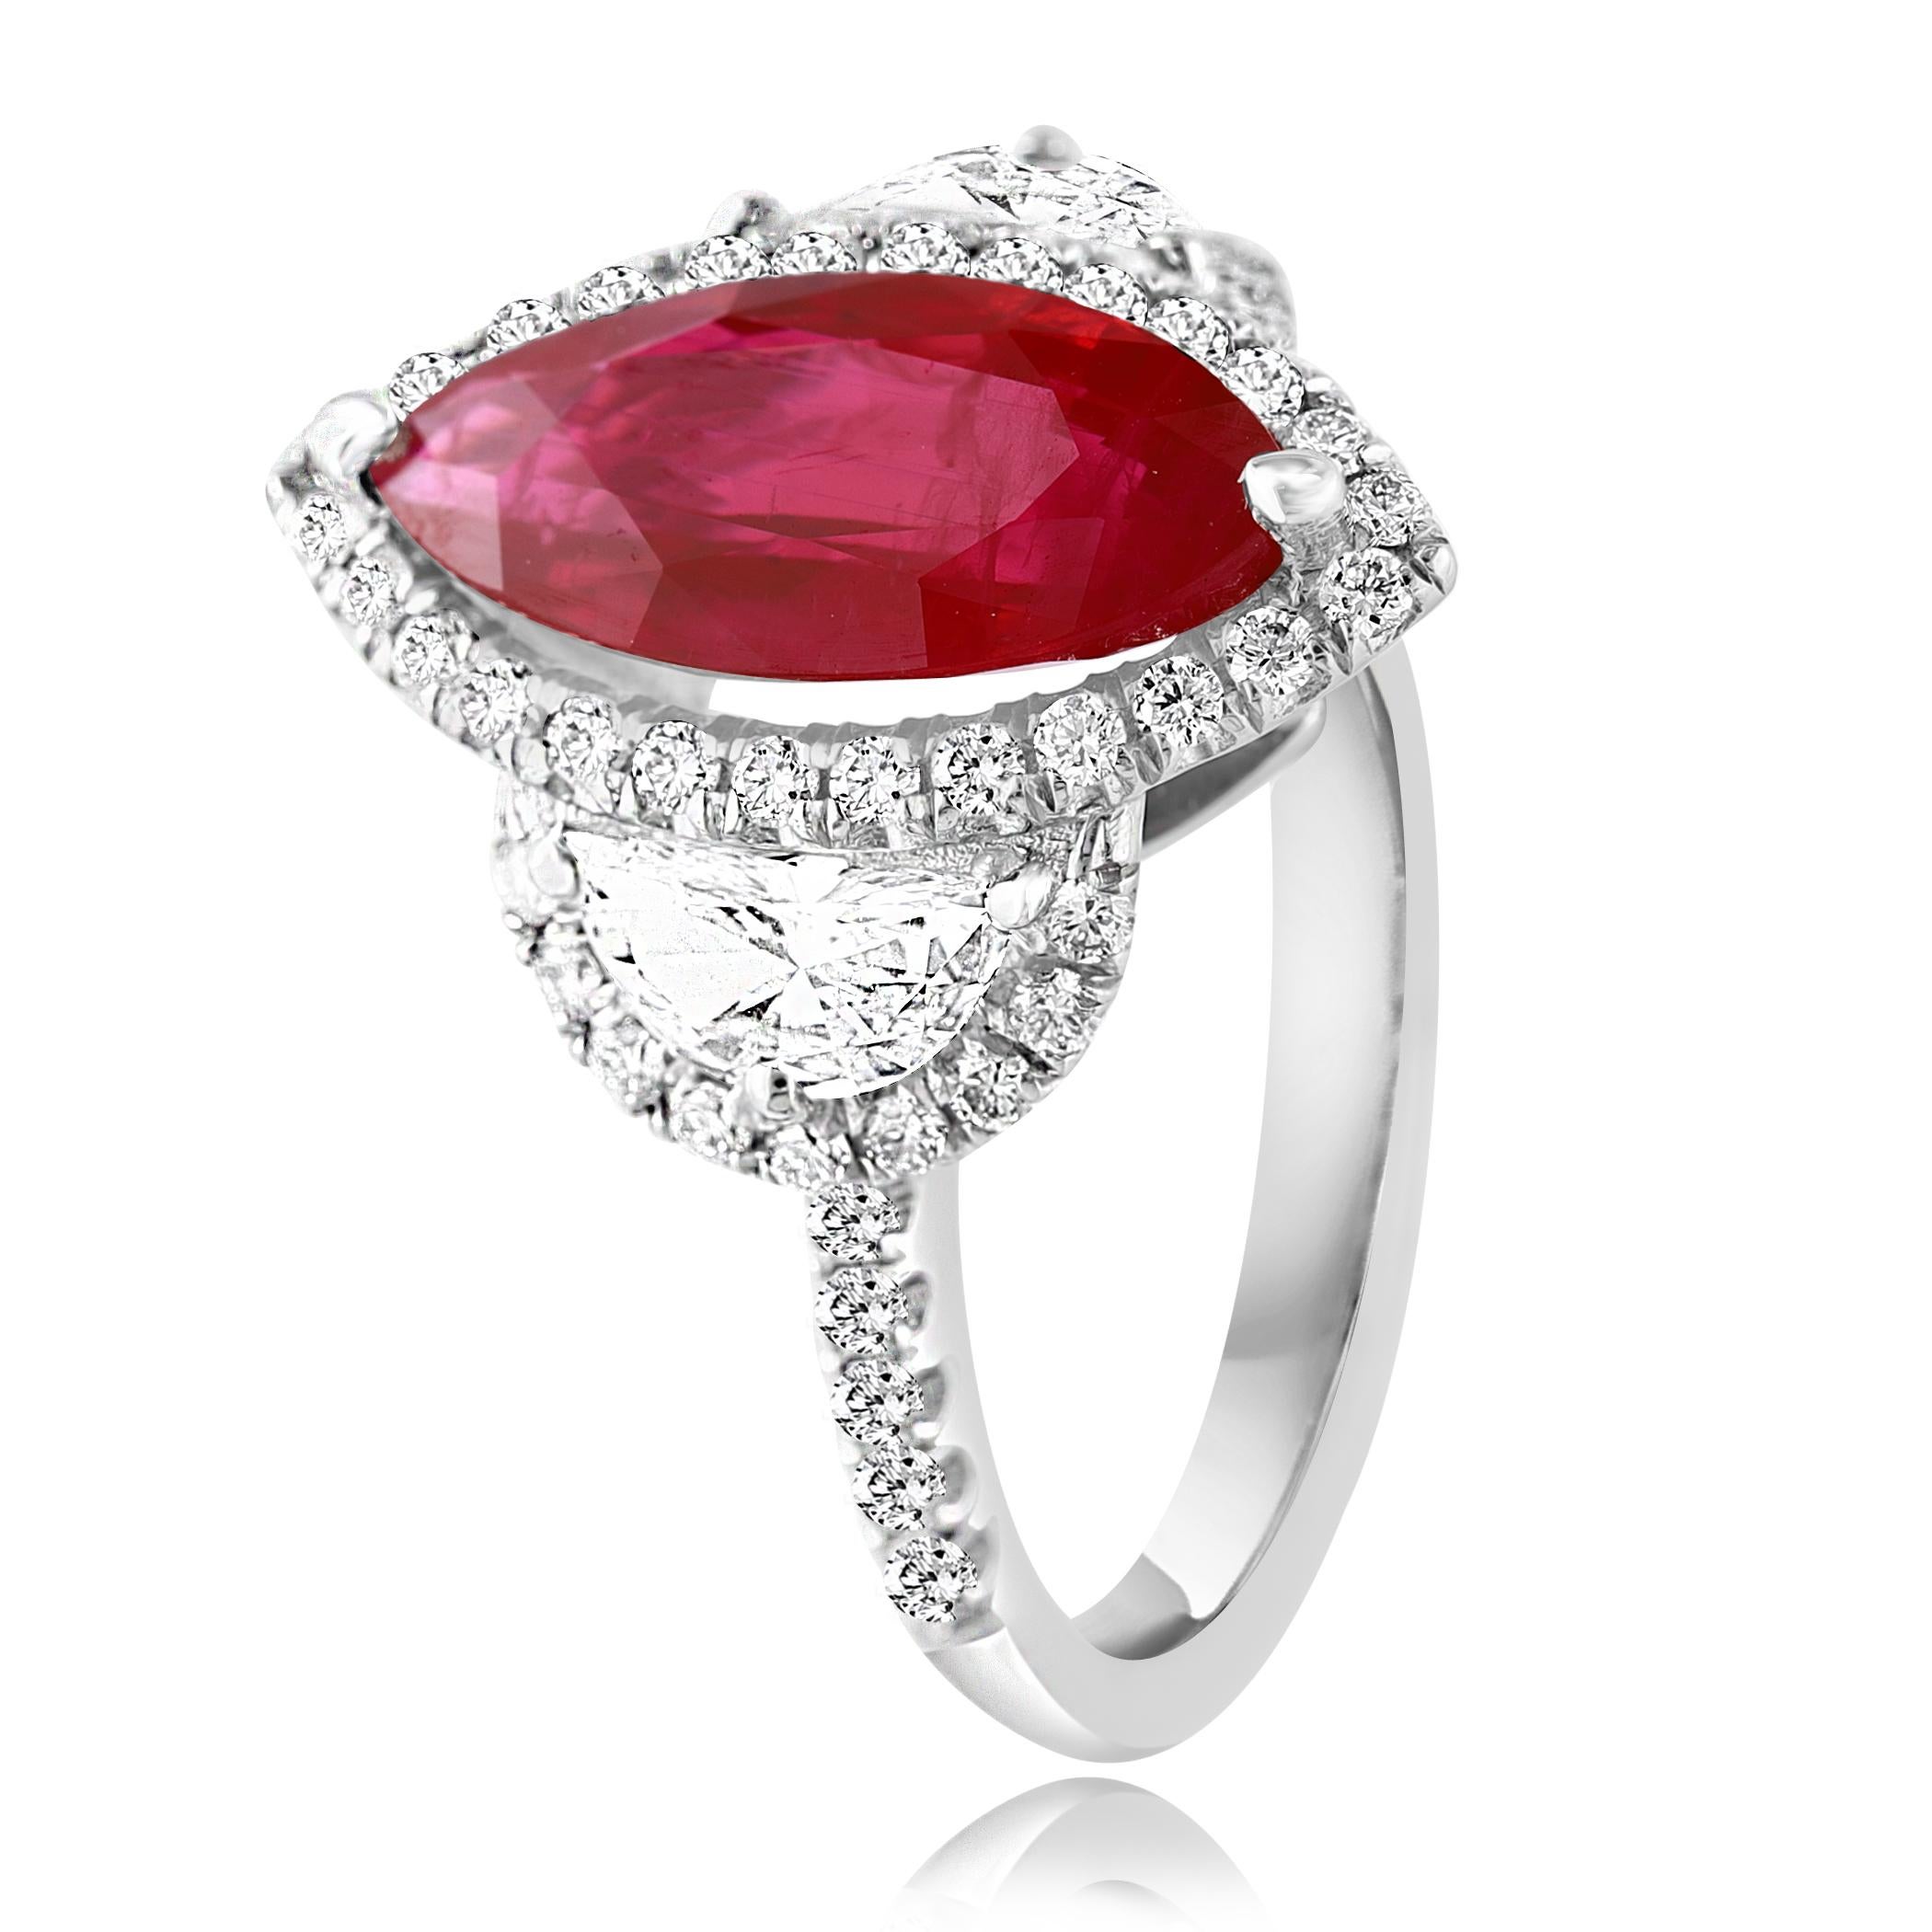 A stunning ring showcasing a rich intense Burmese Red Marquise cut Certified Ruby weighing 3.01 carats surrounded by a row of diamonds. Flanking the center stone are two brilliant cut half-moon diamonds, weighing 0.57 carats total, framed in a